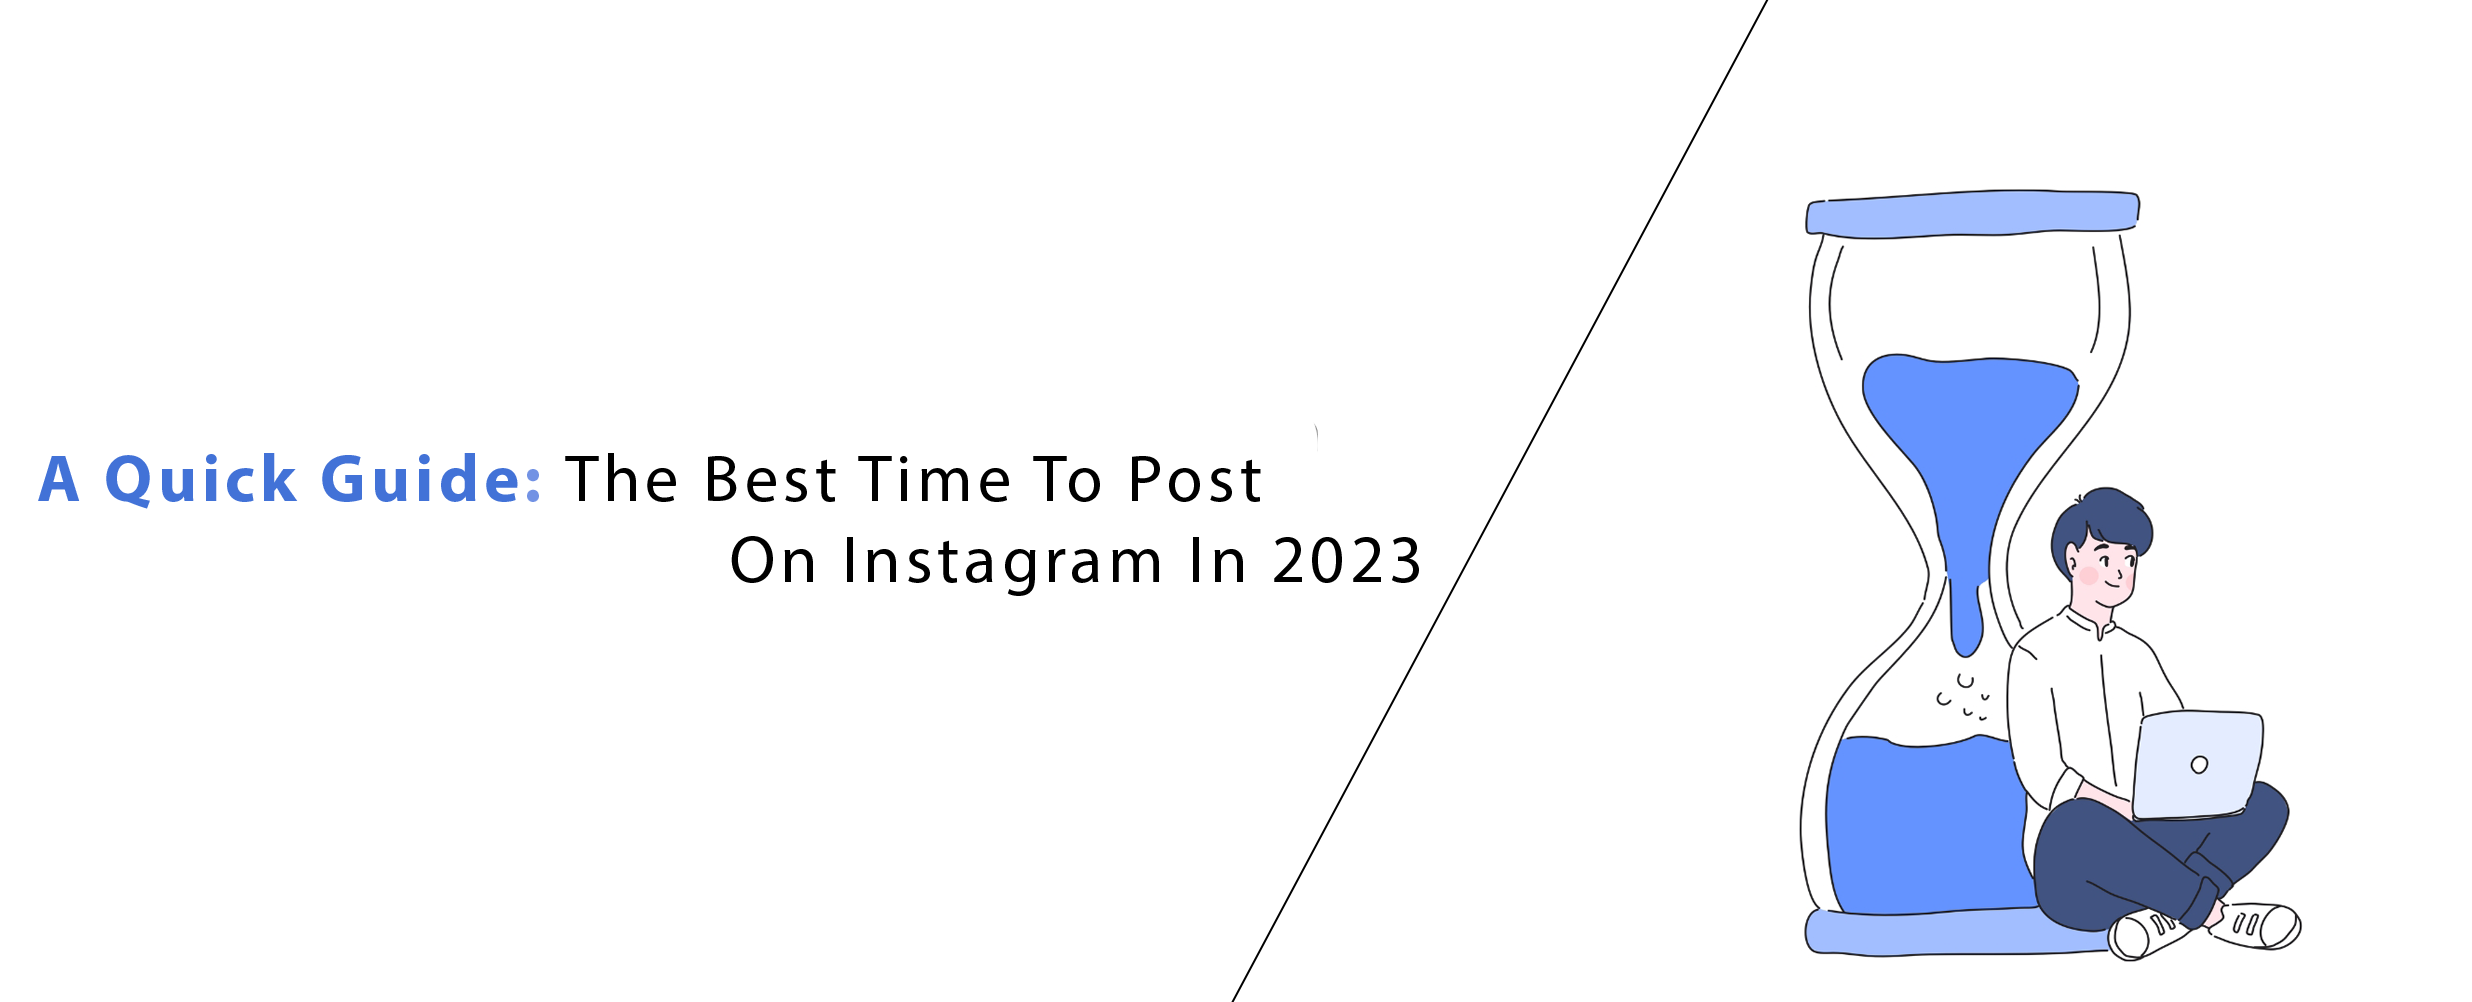 The Best Time To Post On Instagram In 2023